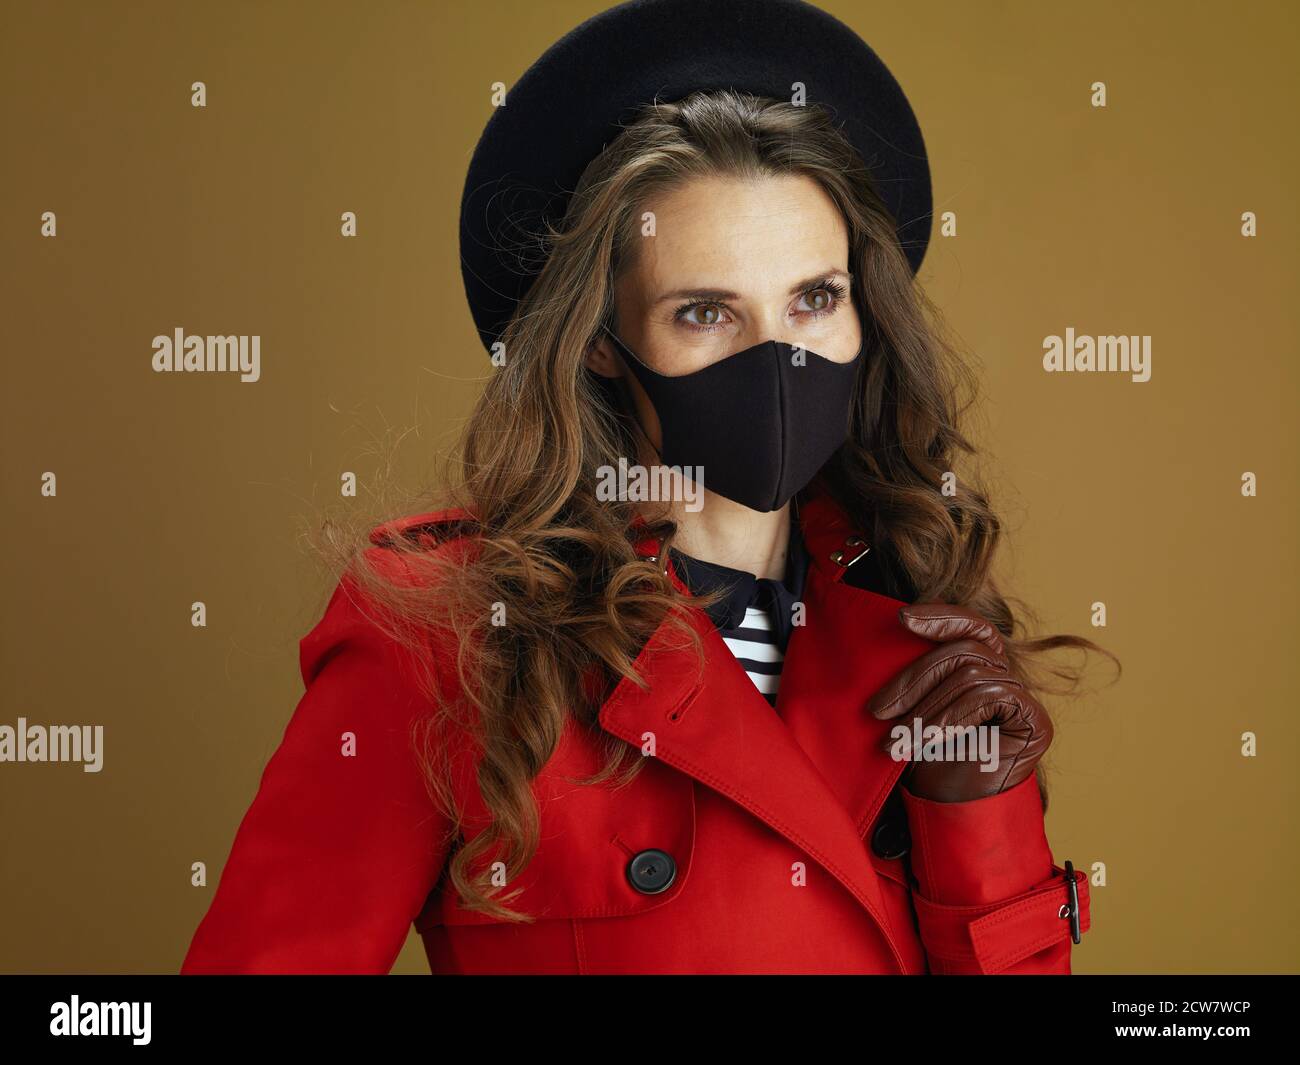 Life during covid-19 pandemic. elegant woman in red coat with black mask isolated on beige background. Stock Photo